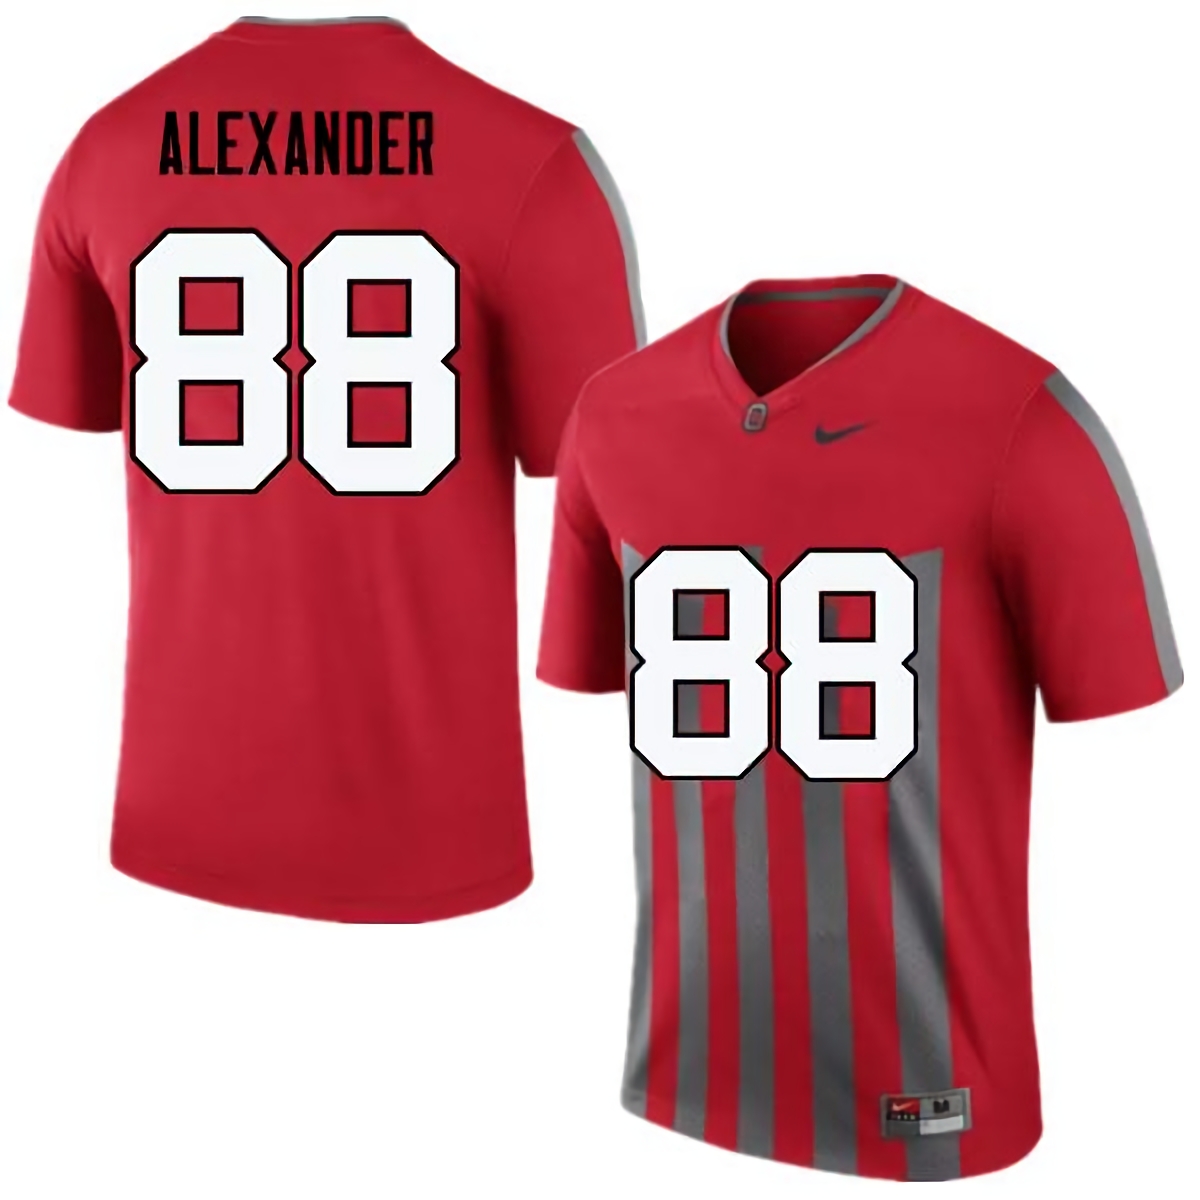 AJ Alexander Ohio State Buckeyes Men's NCAA #88 Nike Throwback Red College Stitched Football Jersey TDR1556HX